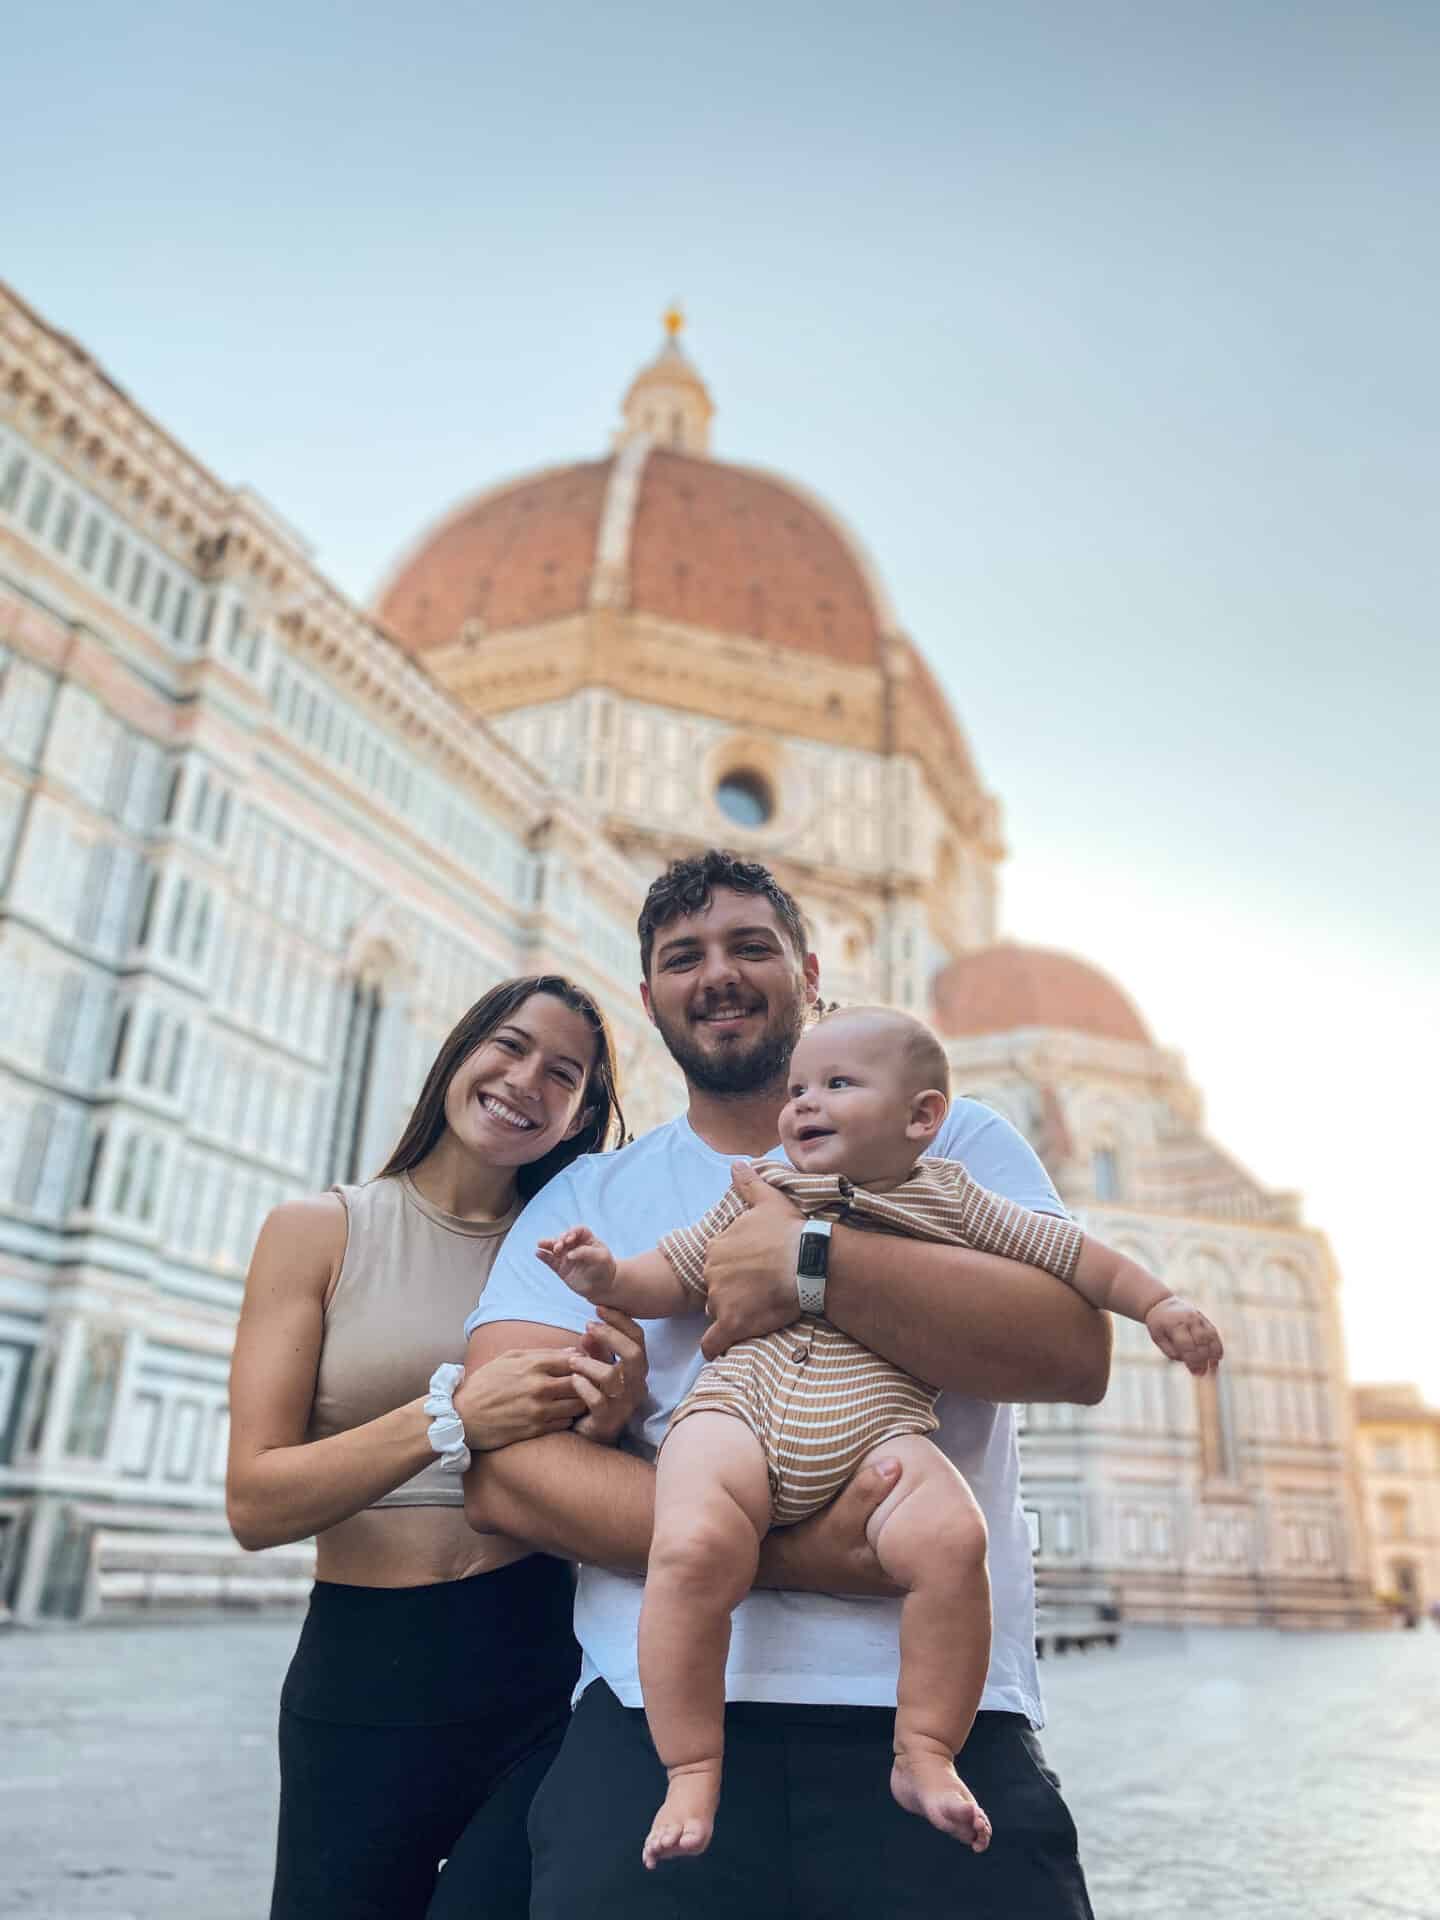 Sweet Catholic Couple with baby in arms smiling in front of Florence's Dome